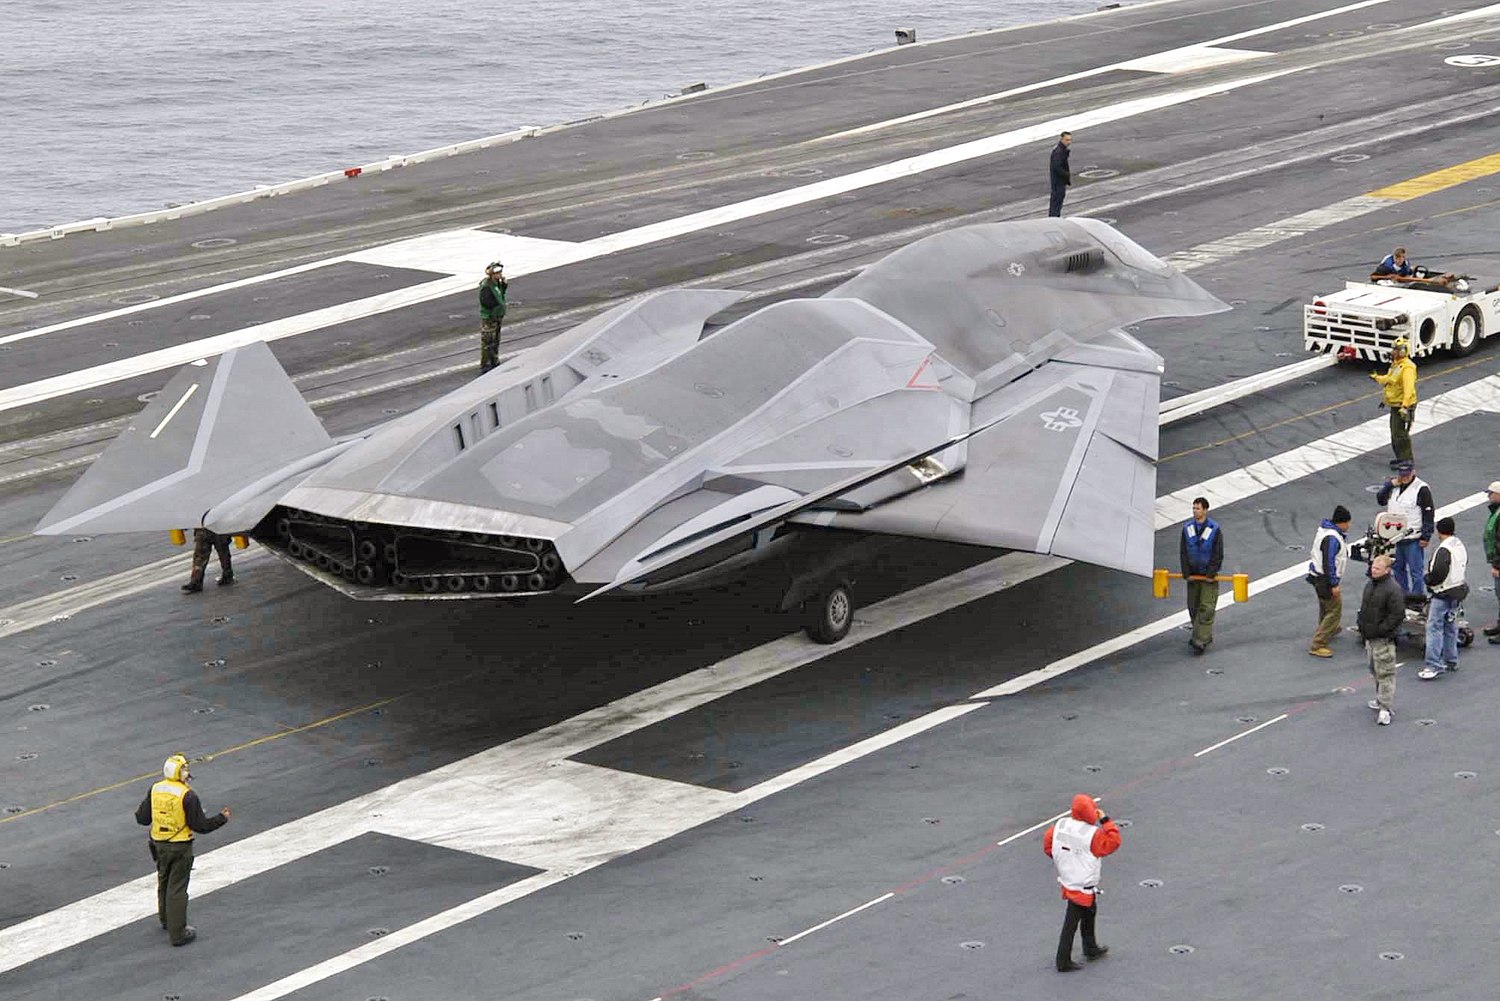 Amphibious fighter planes, Sky Captain And The World of Tomorrow Wiki